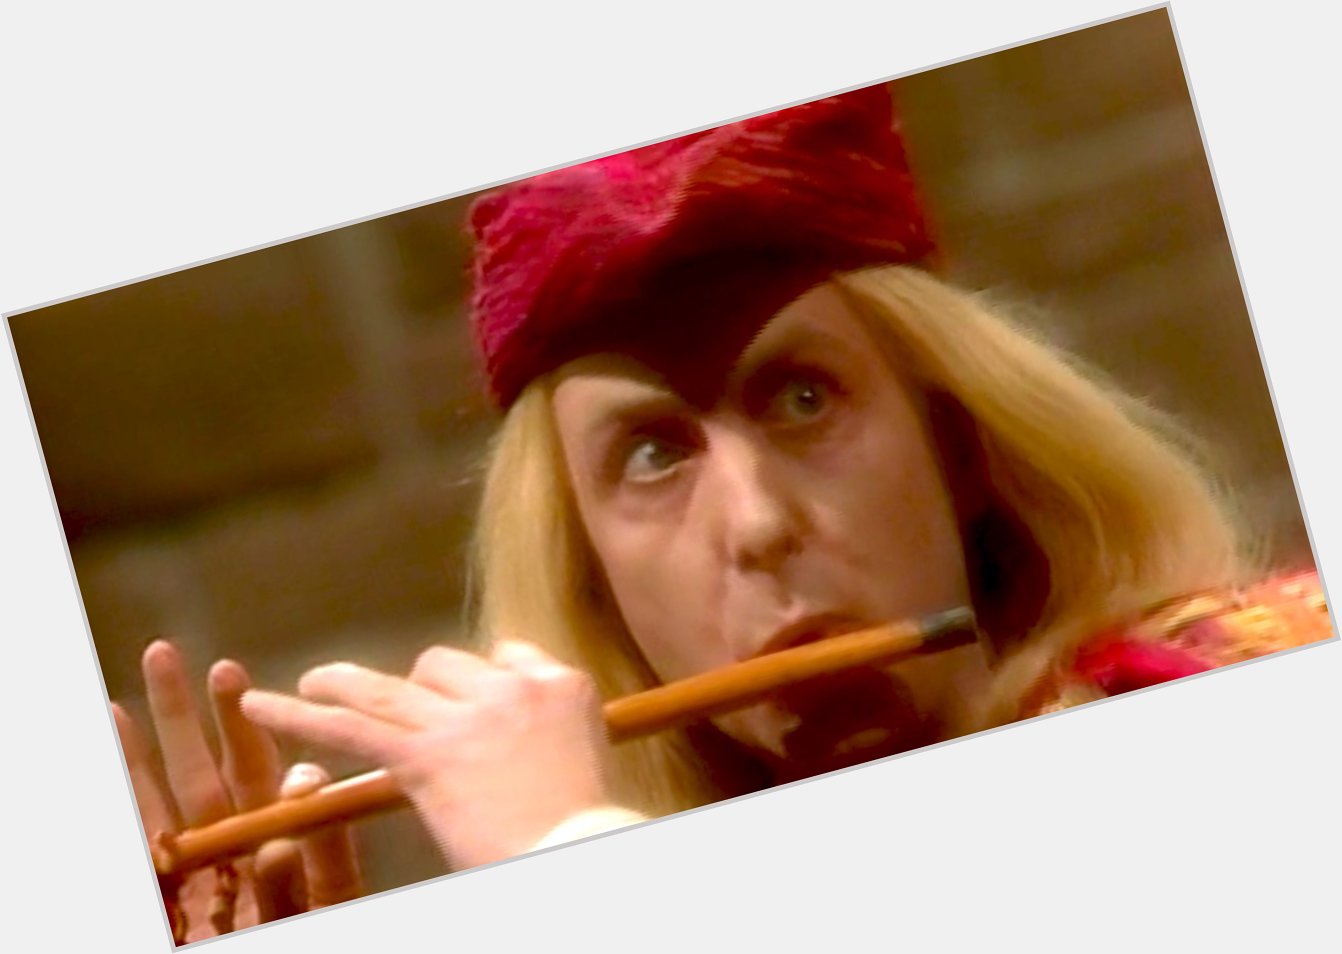 Happy birthday to the one and only Eric Idle.
Faerie Tale Theatre - Season 4, Episode 3, \"The Pied Piper Of Hamelin\" 